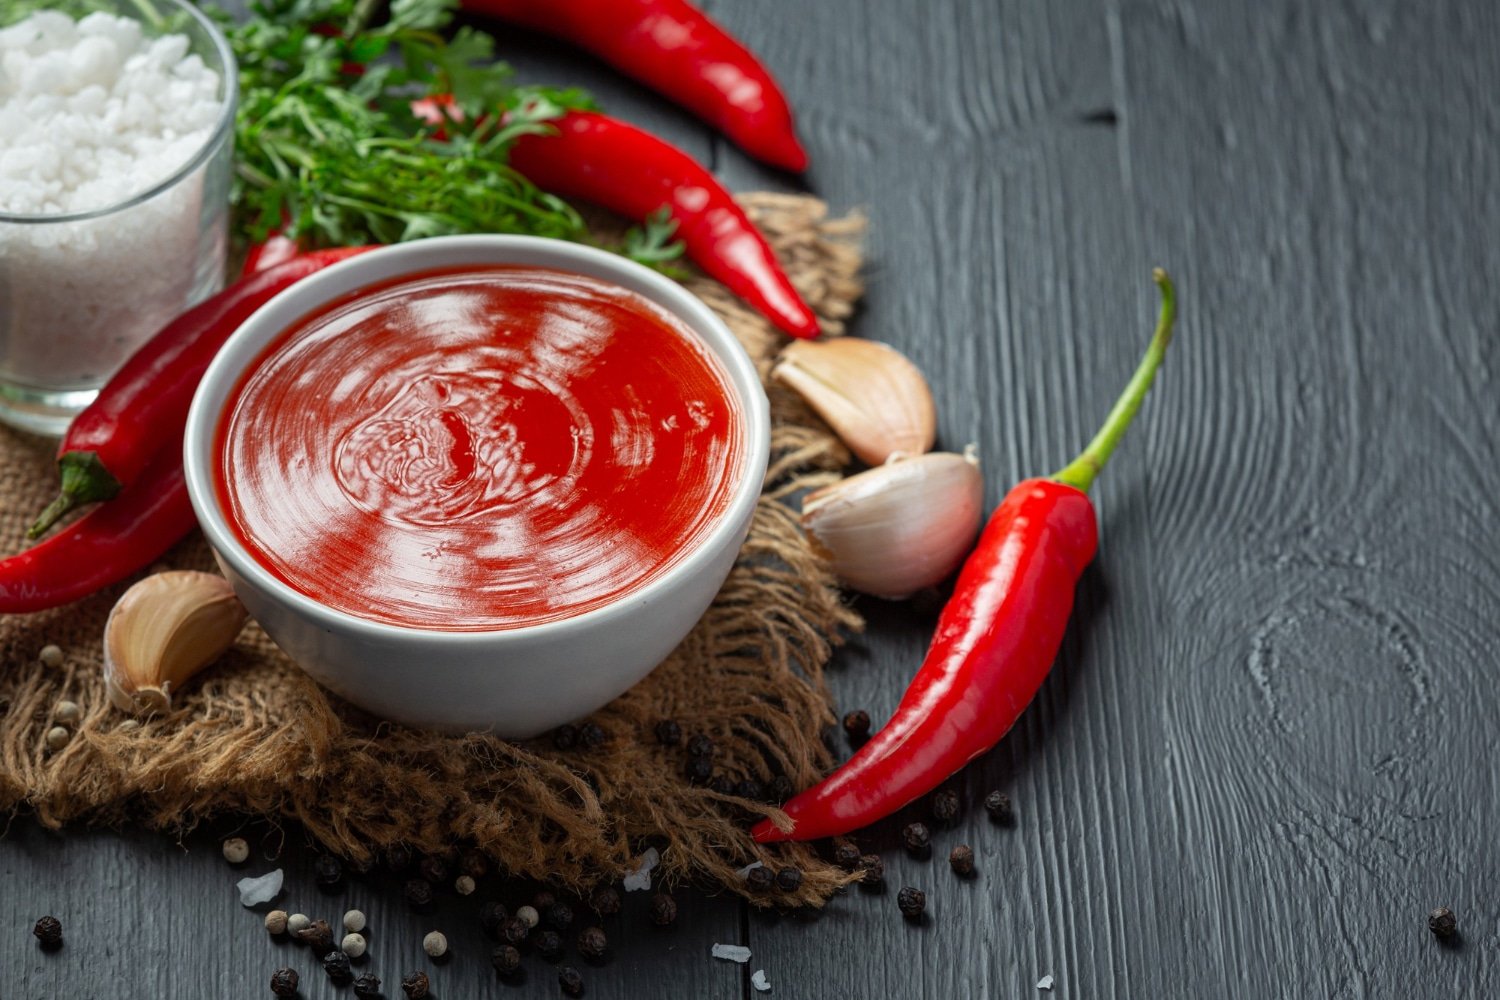 Gourmet Hot Sauce by Red Clay Hot Sauce